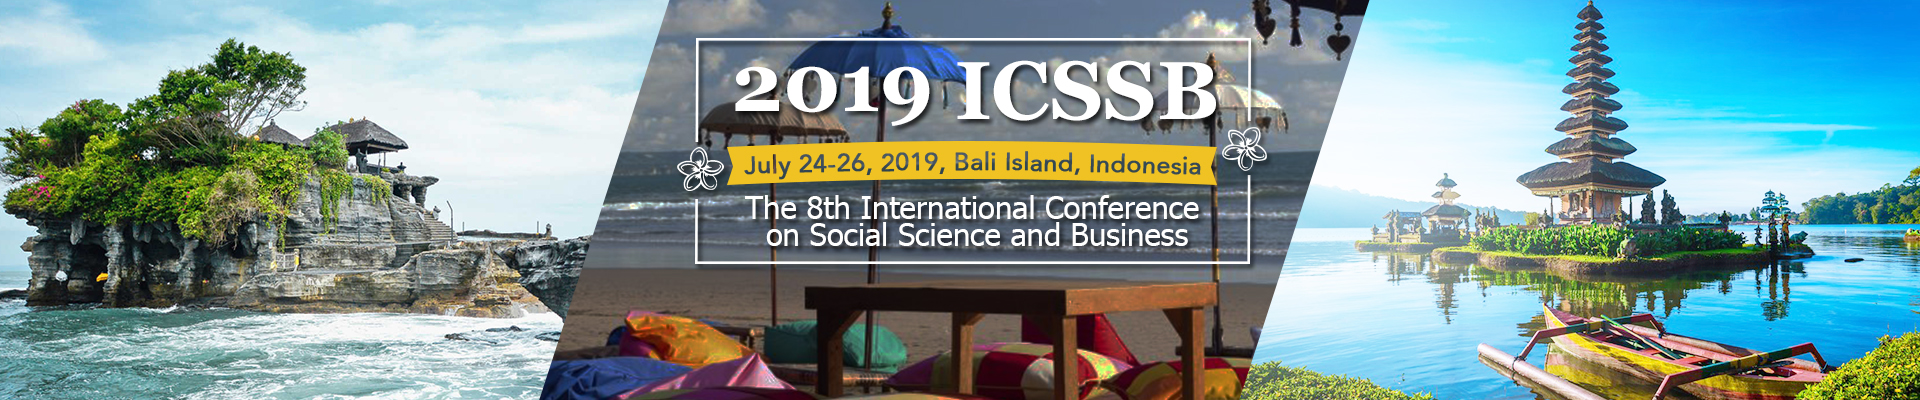 2019 ICSSB The 8th International Conference on Social Science and Business, Bali Island, Bali, Indonesia